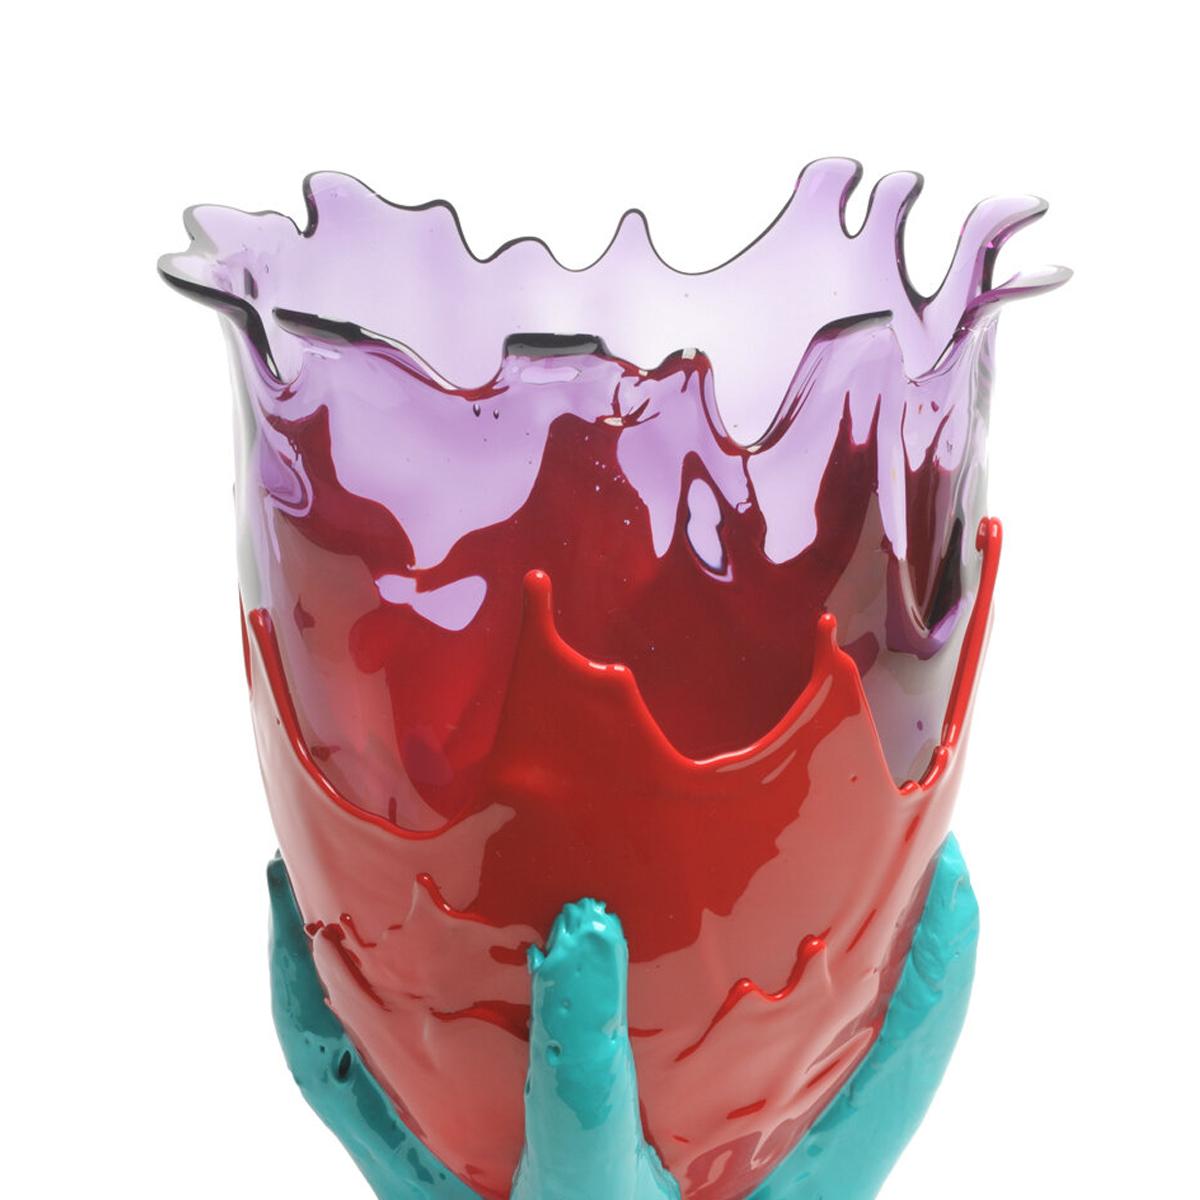 Clear extra colour vase - clear lilac, matt red, matt turquoise.

Vase in soft resin designed by Gaetano Pesce in 1995 for Fish Design collection.

Measures: L- Ø 22cm x H 36cm
Colours: clear lilac, matt red, matt turquoise.
Other sizes